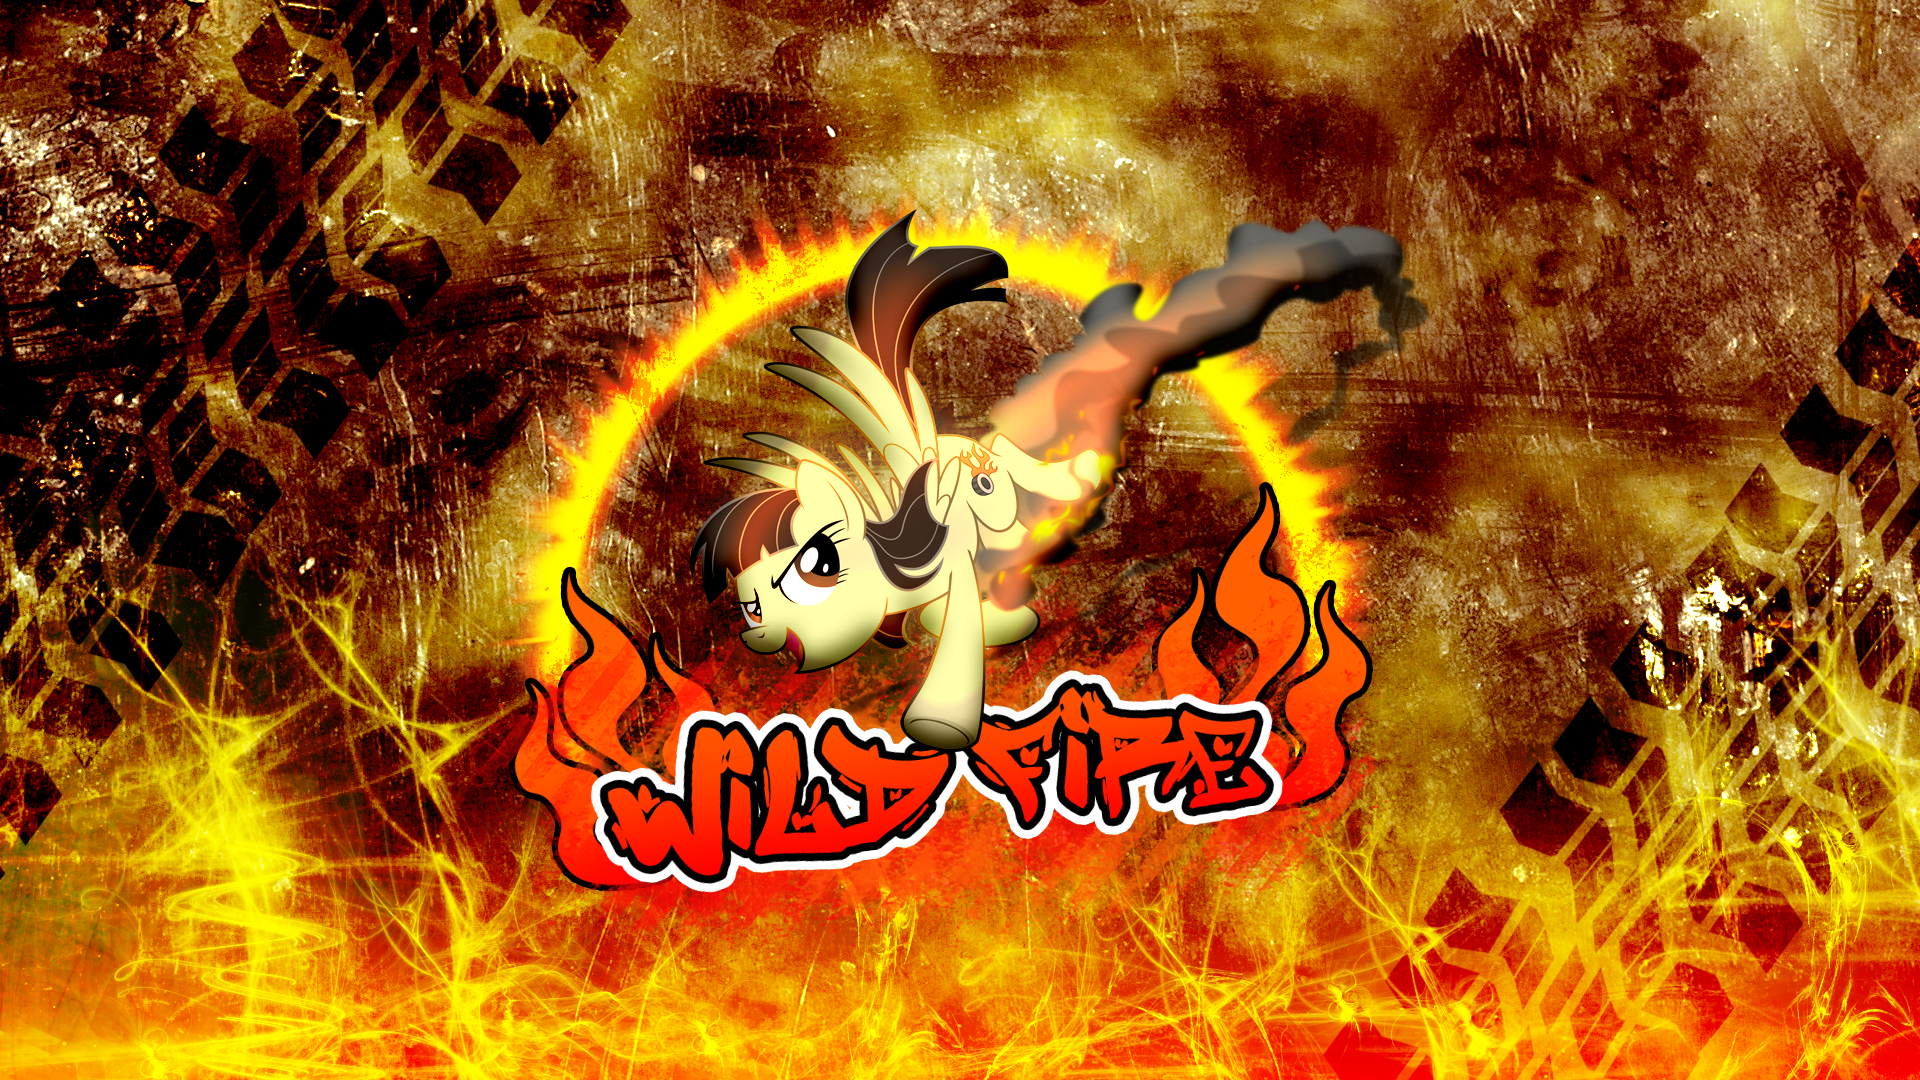 B-Day: Wild Fire Wallpaper by Equestria-Prevails and M24Designs